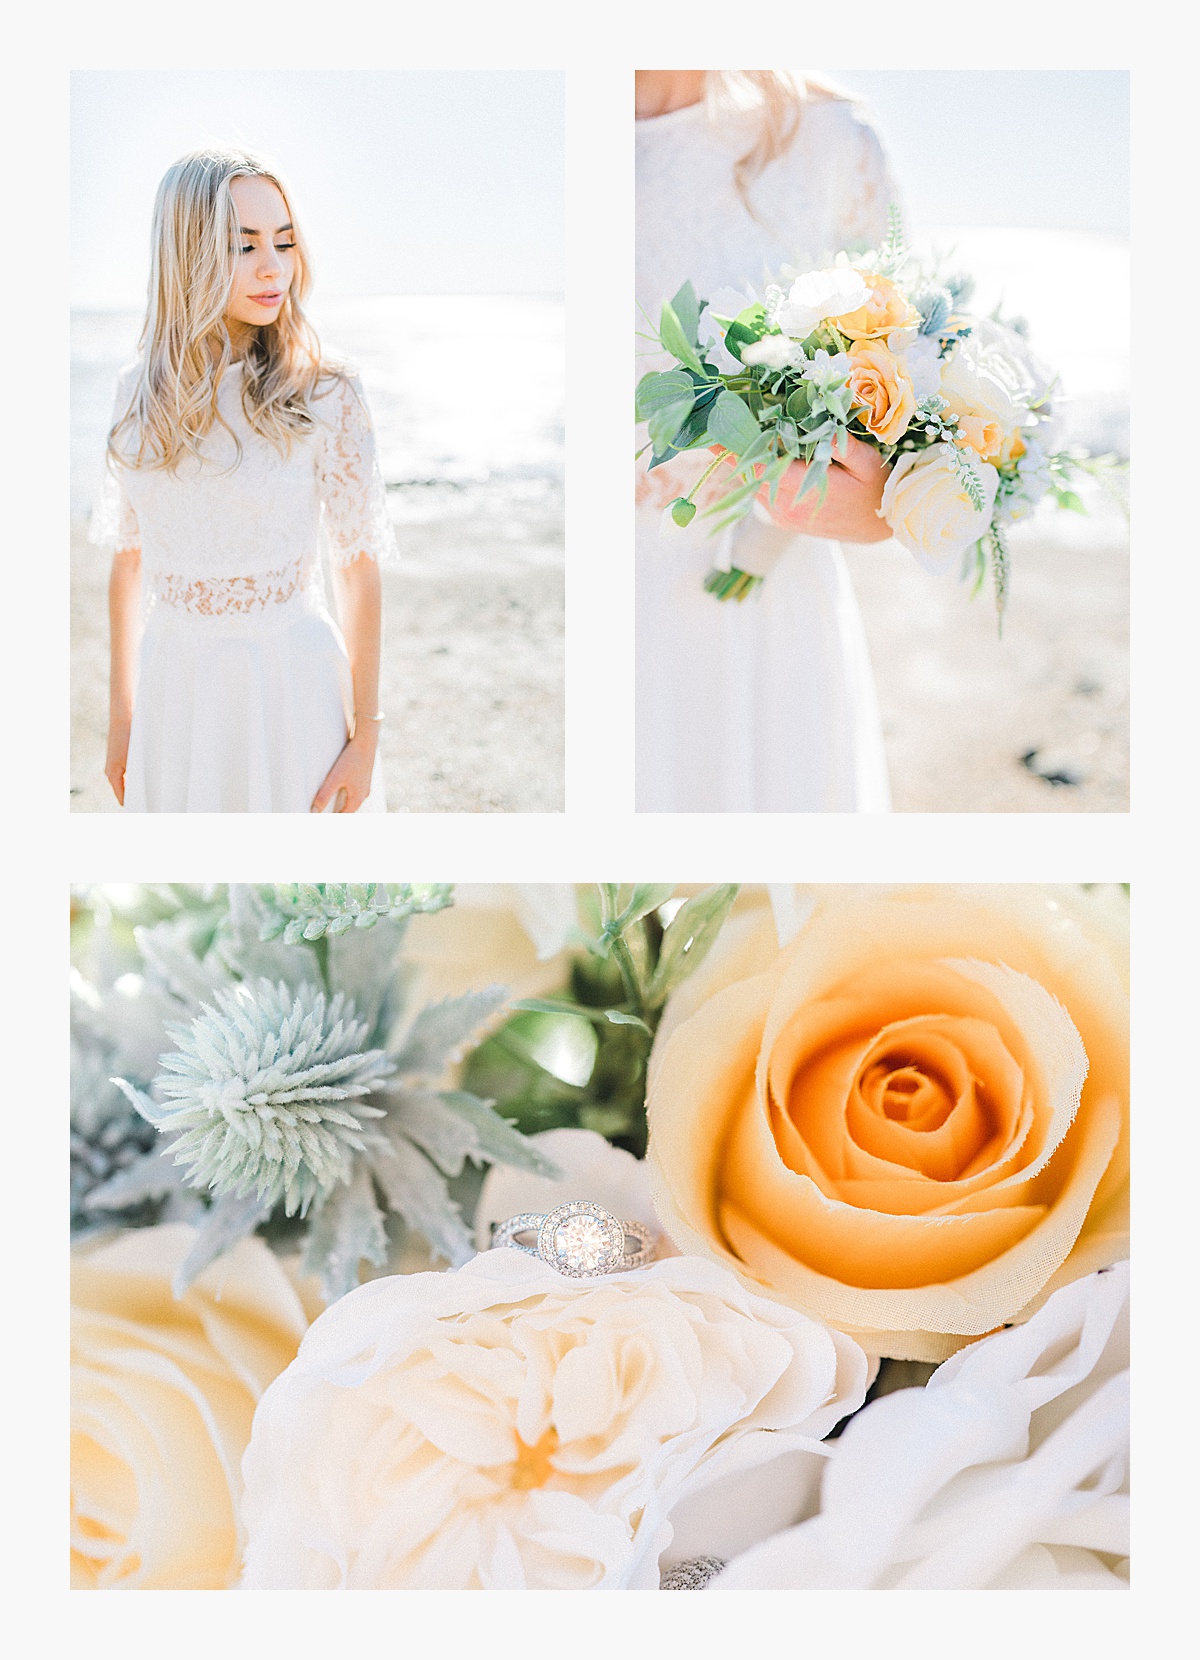 Styled bridal portraits on the beach in simple lace wedding skirt and lace top with Emma Rose Company.  Yellow and ivory inspired bridal shoot in the Pacific Northwest._0000.jpg